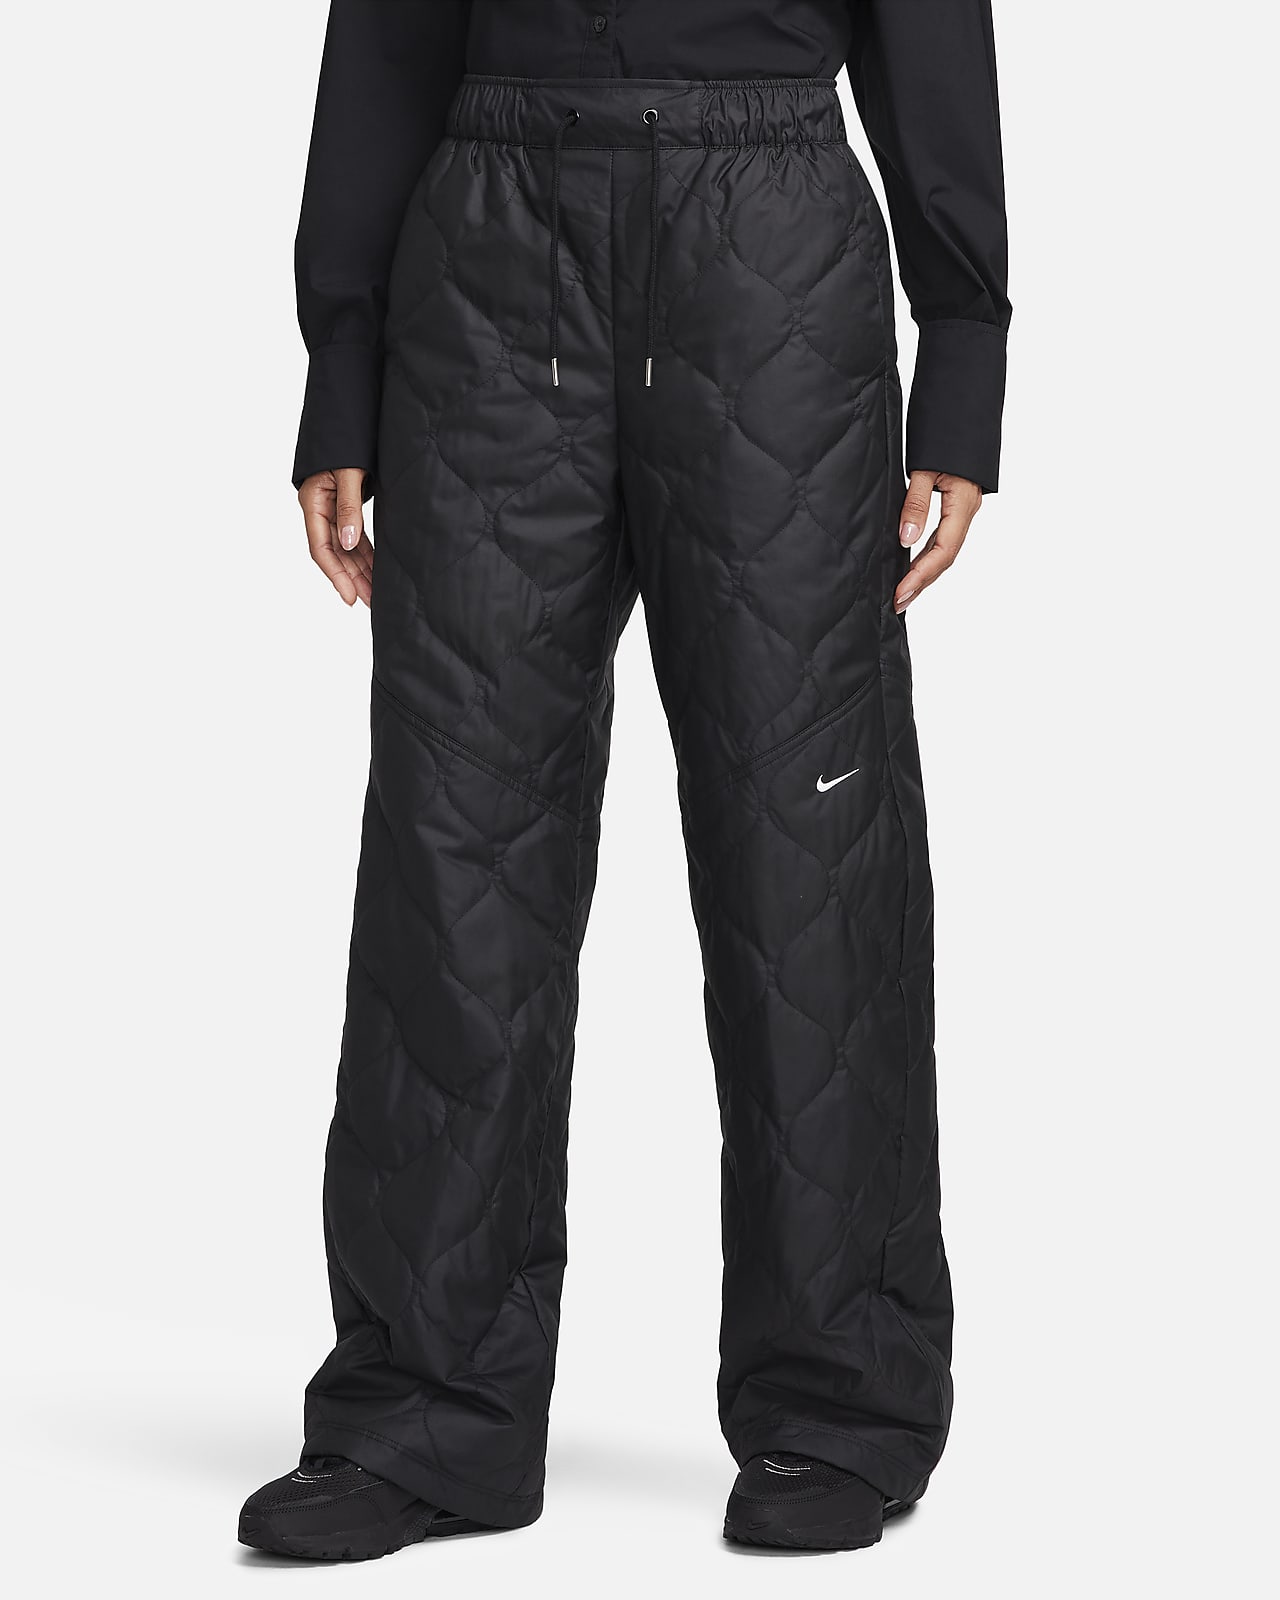 https://static.nike.com/a/images/t_PDP_1280_v1/f_auto,q_auto:eco/3a73f321-5c8d-4895-a01a-0697b61006c8/sportswear-essential-high-waisted-open-hem-quilted-trousers-nkqJ5W.png